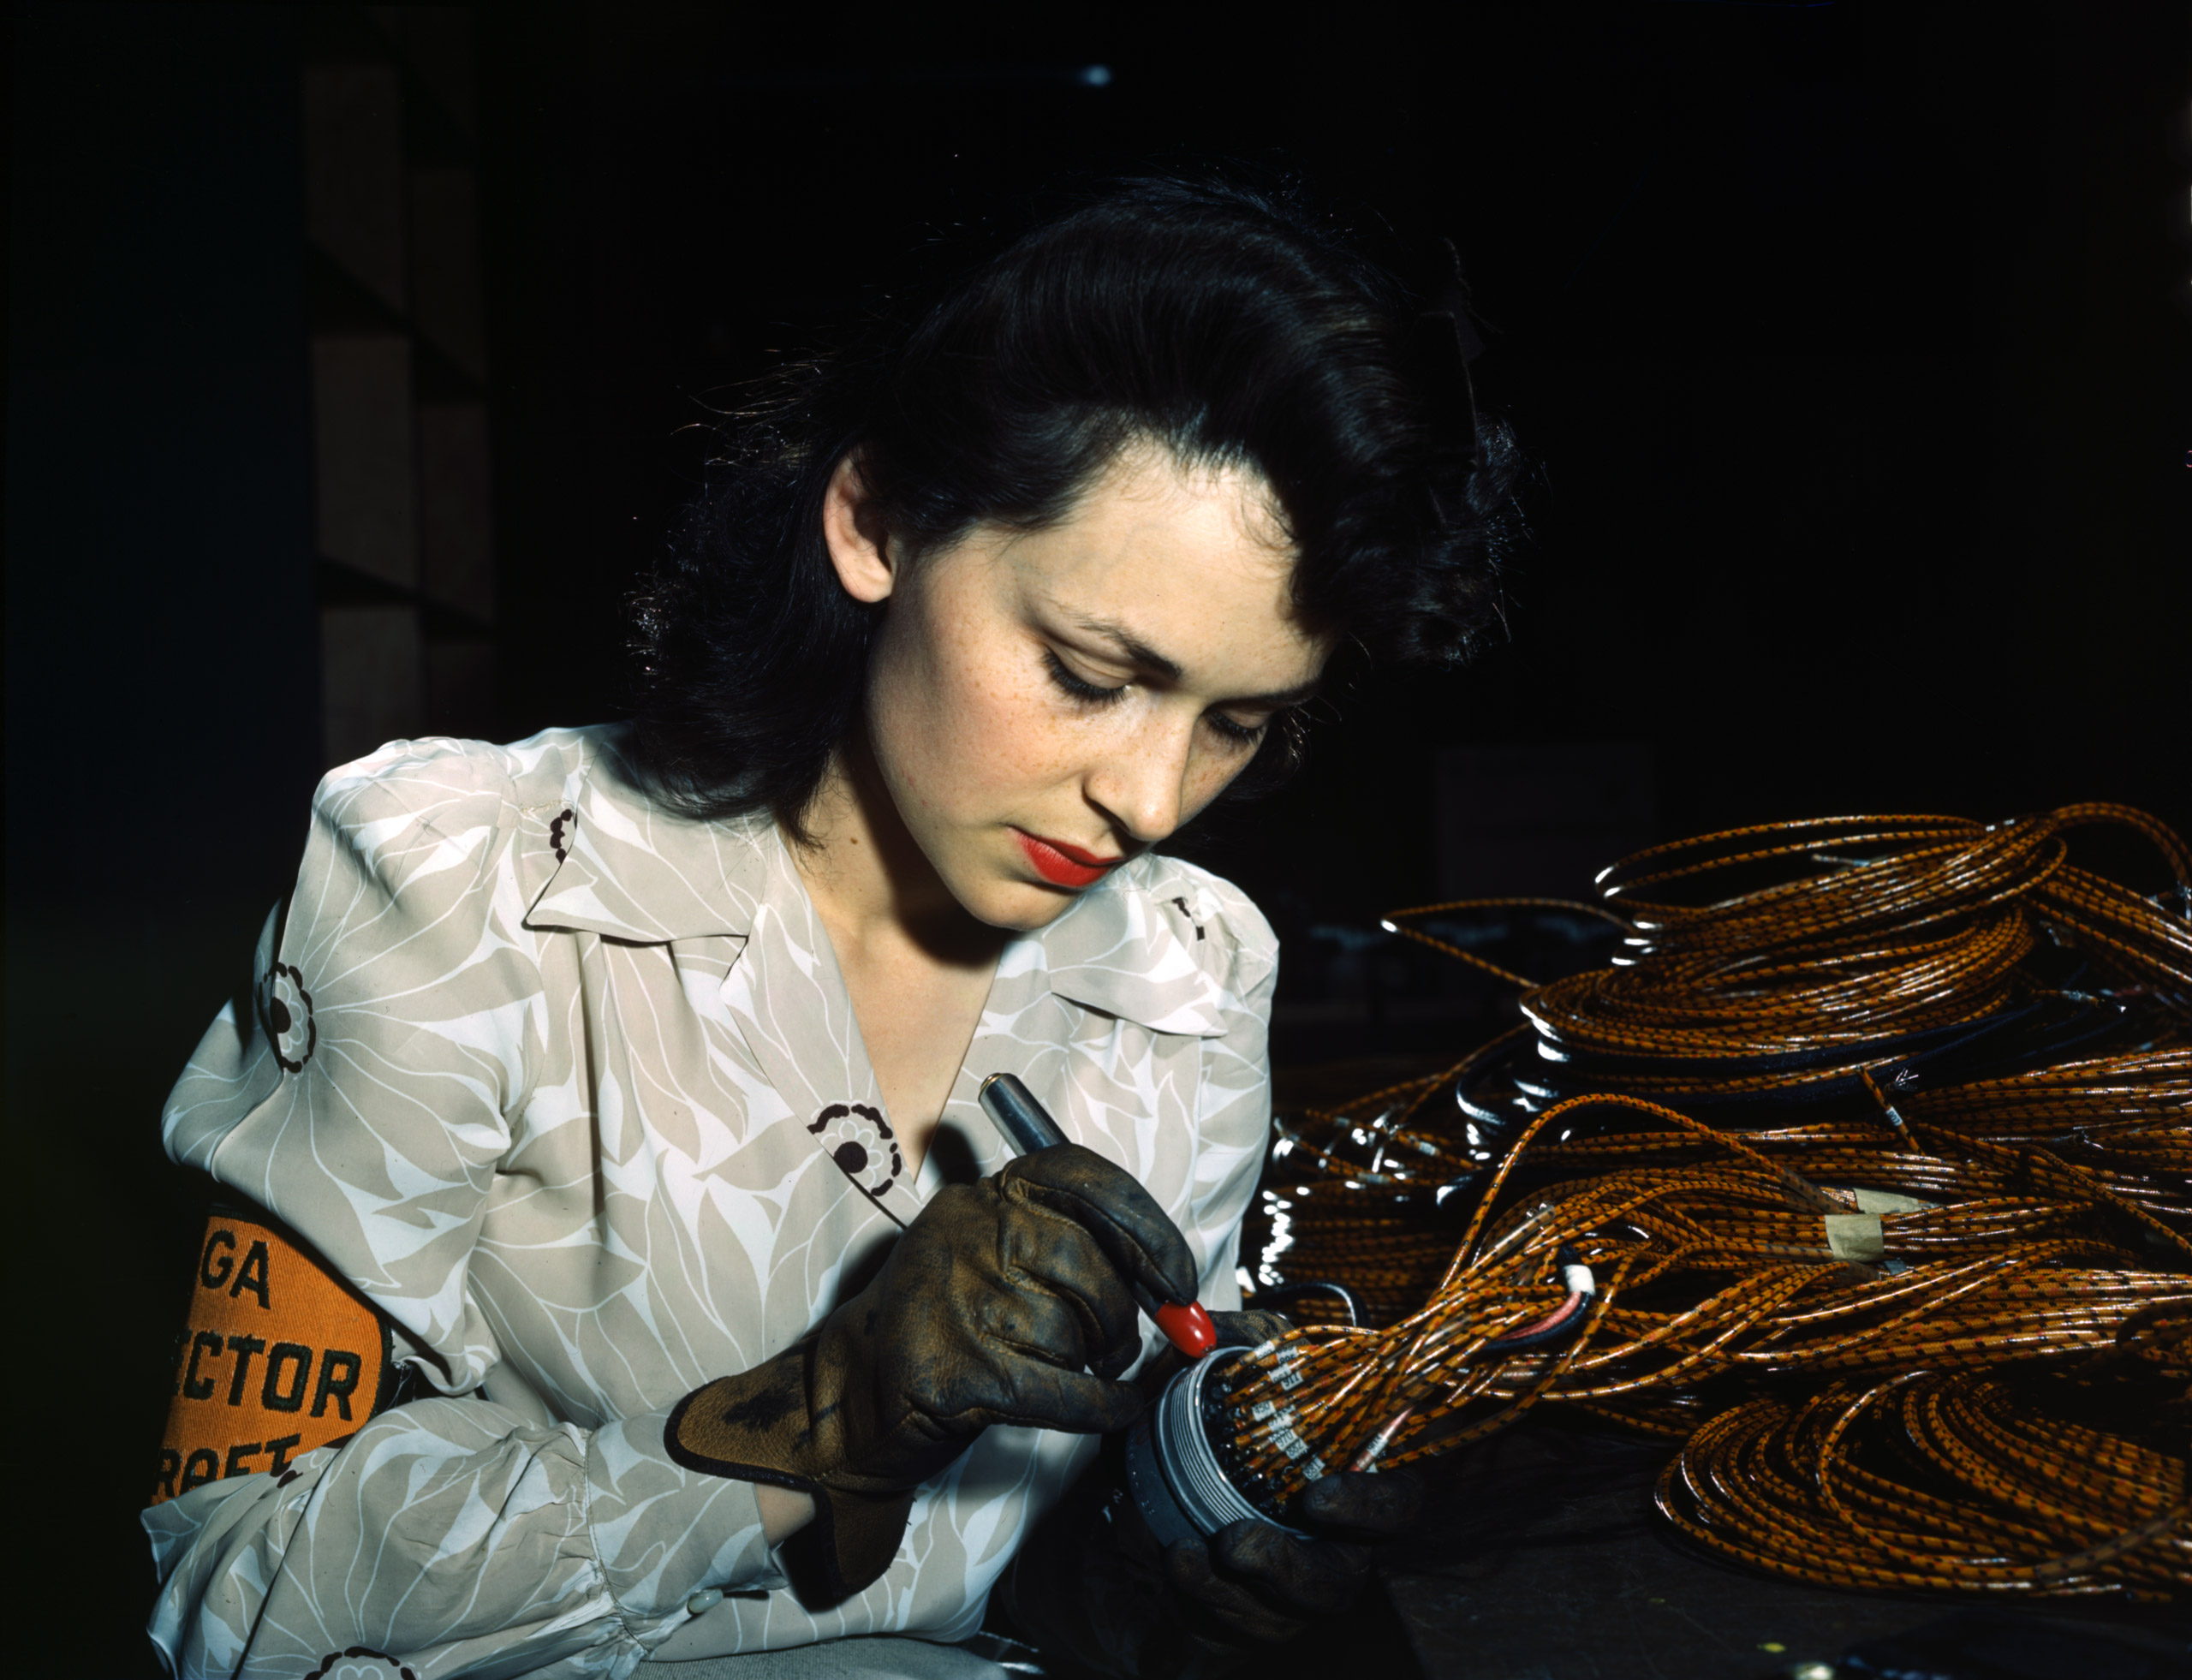 Woman aircraft worker, Vega Aircraft Corporation, Burbank, Calif. Shown checking electrical assemblies, June 1942. Photographed by David Bransby for the Farm Security Administration.